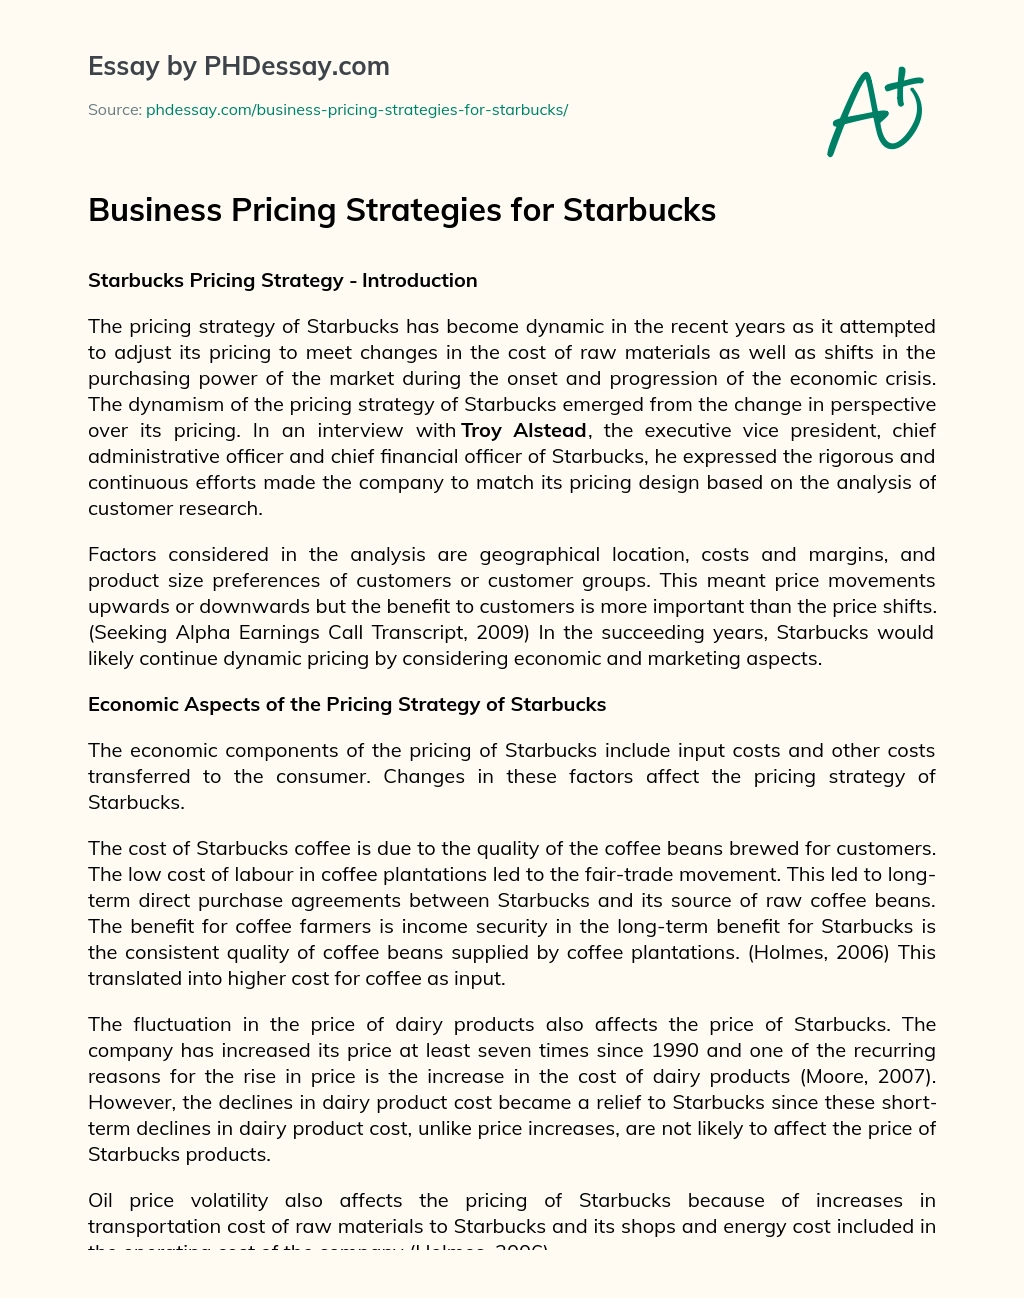 Business Pricing Strategies for Starbucks essay